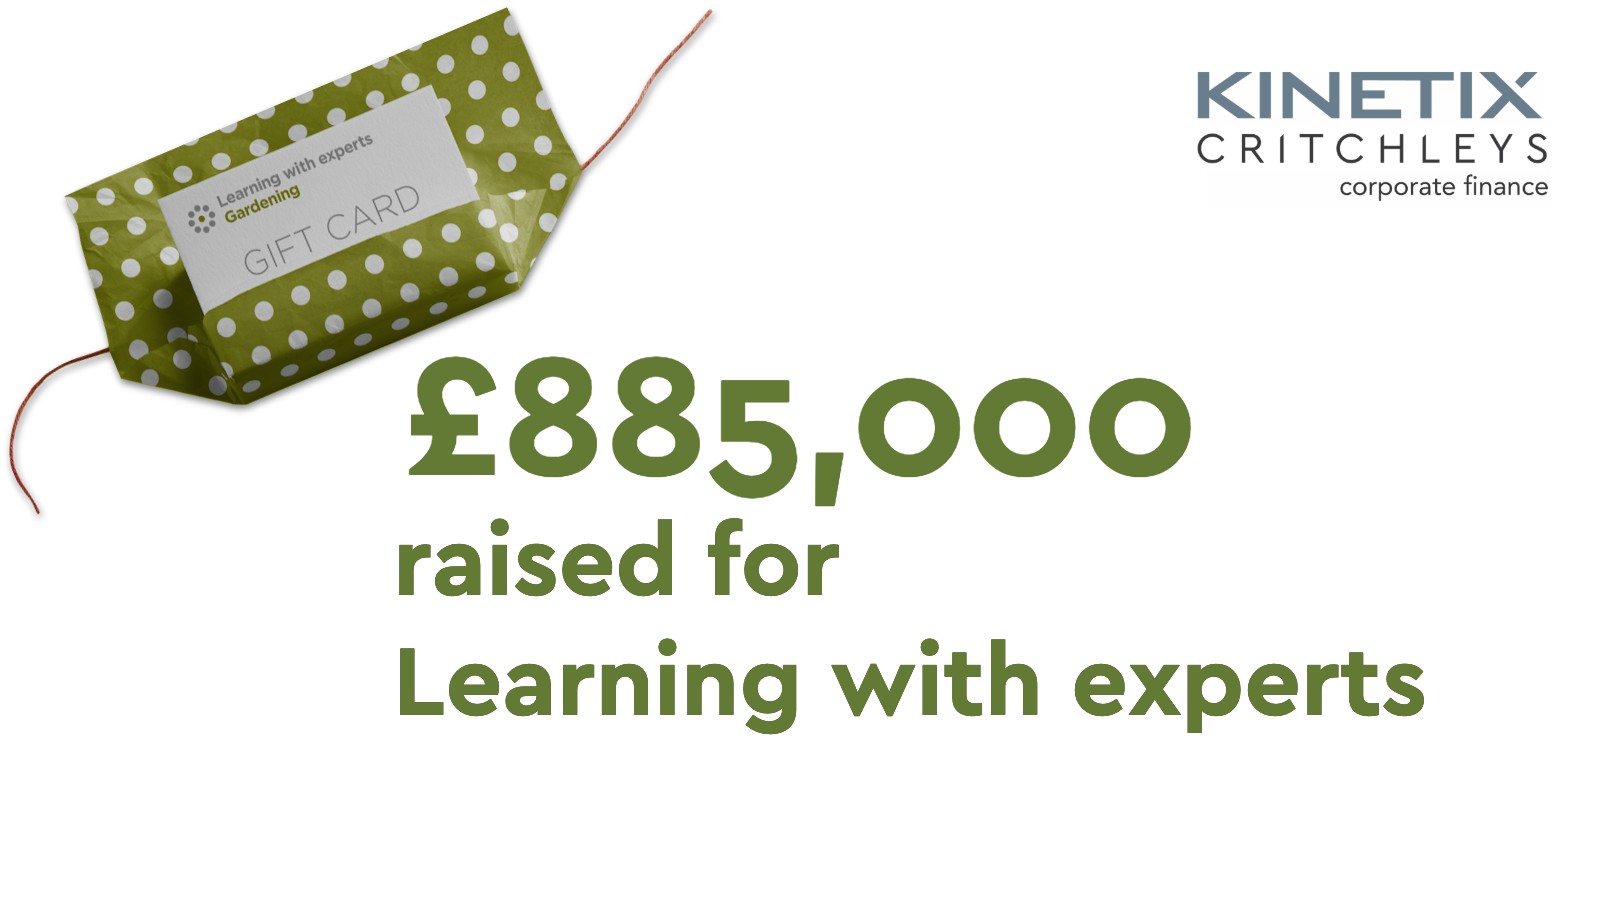 £885,000 raised for Learning With Experts